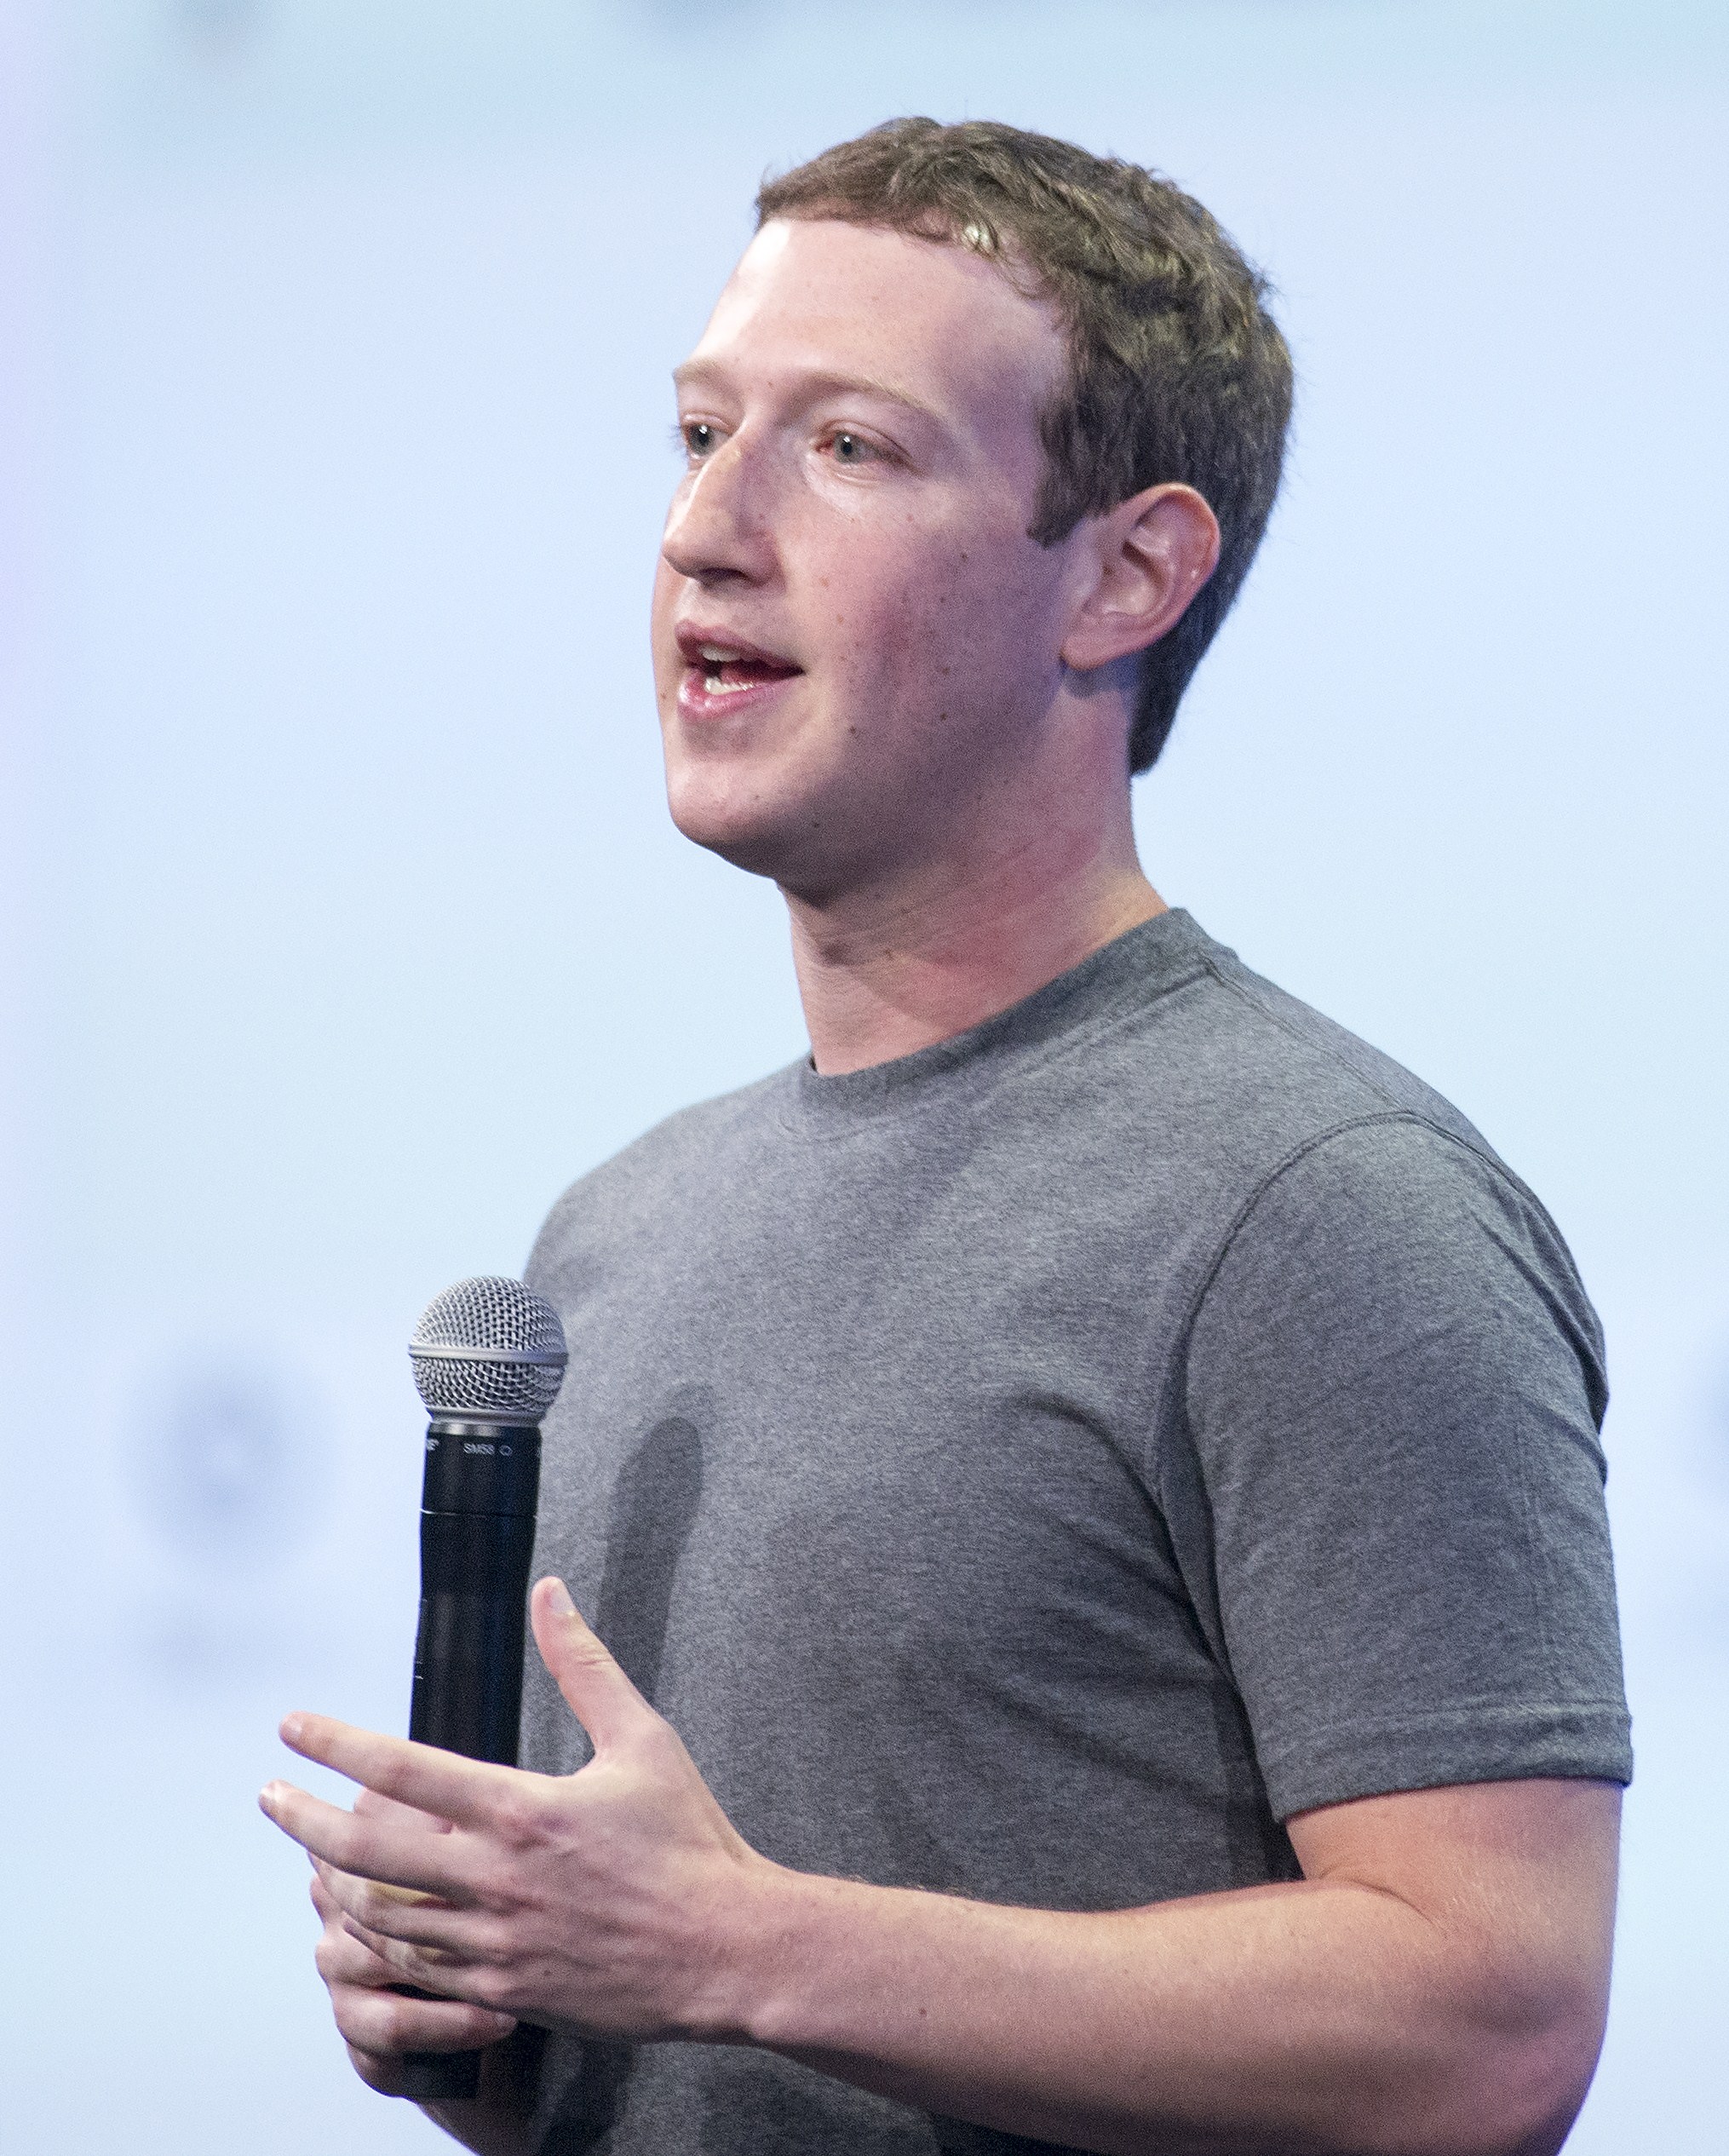 Mark Zuckerberg at the F8 summit in San Francisco on March 25, 2015. (Josh Edelson—AFP/Getty Images)